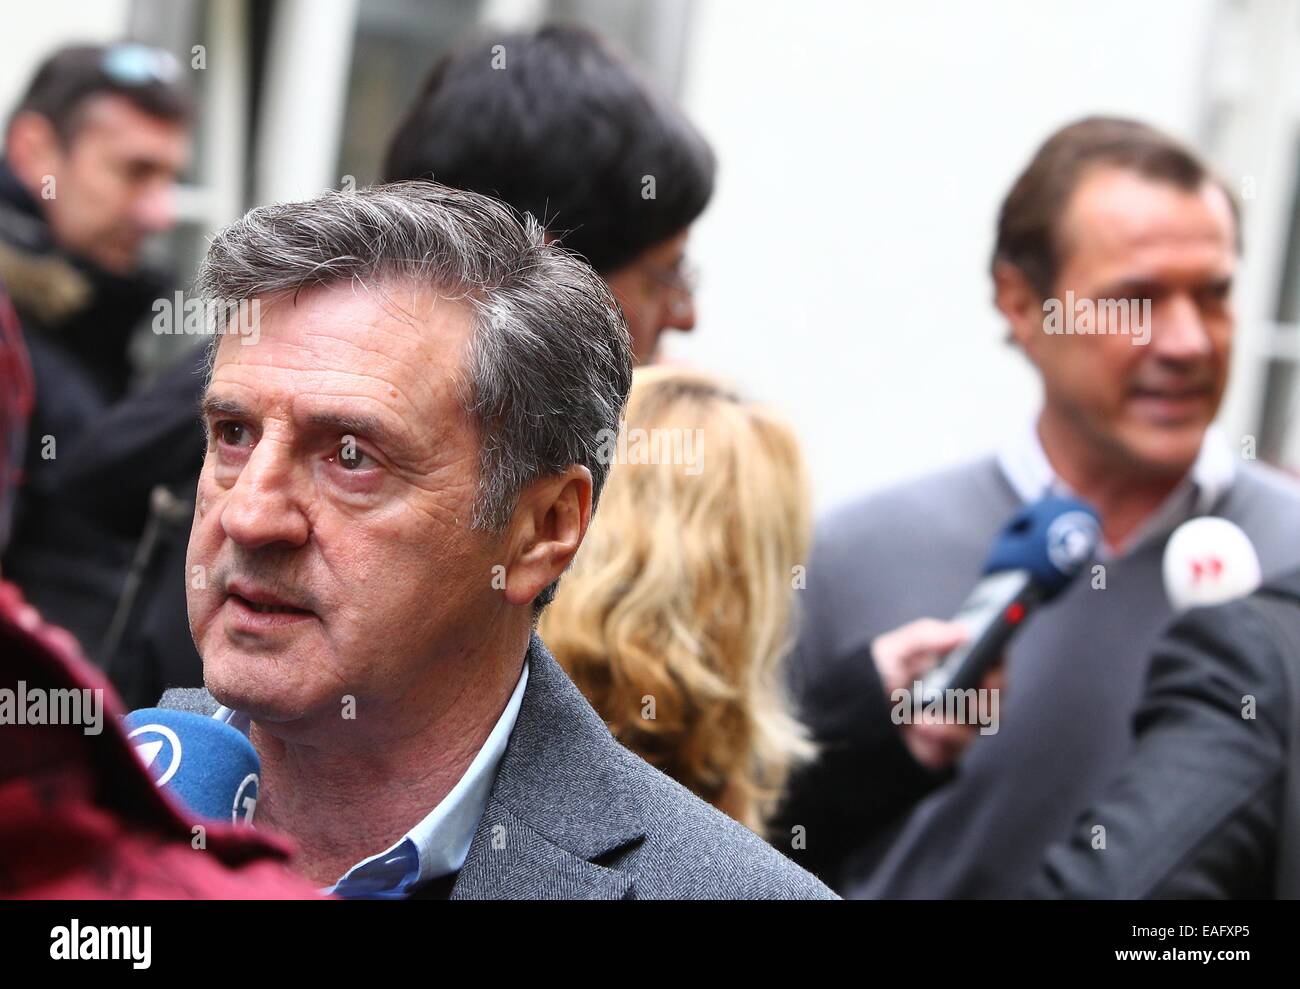 French actor Daniel Auteuil (front) and German actor Sebastian Koch speak to the press during a photocall on the set of the film 'Bamberski-Der Fall Kalinka' (lit. the Kalinka case) in Lindau, Germany, 14 November 2014. The French and German justice system have been dealing with the Kalinka case since three decades. The film focusses on the death of the 14-year old girl and her father's actions of vigilantism. Photo: Karl-Josef Hildenbrand/dpa Stock Photo